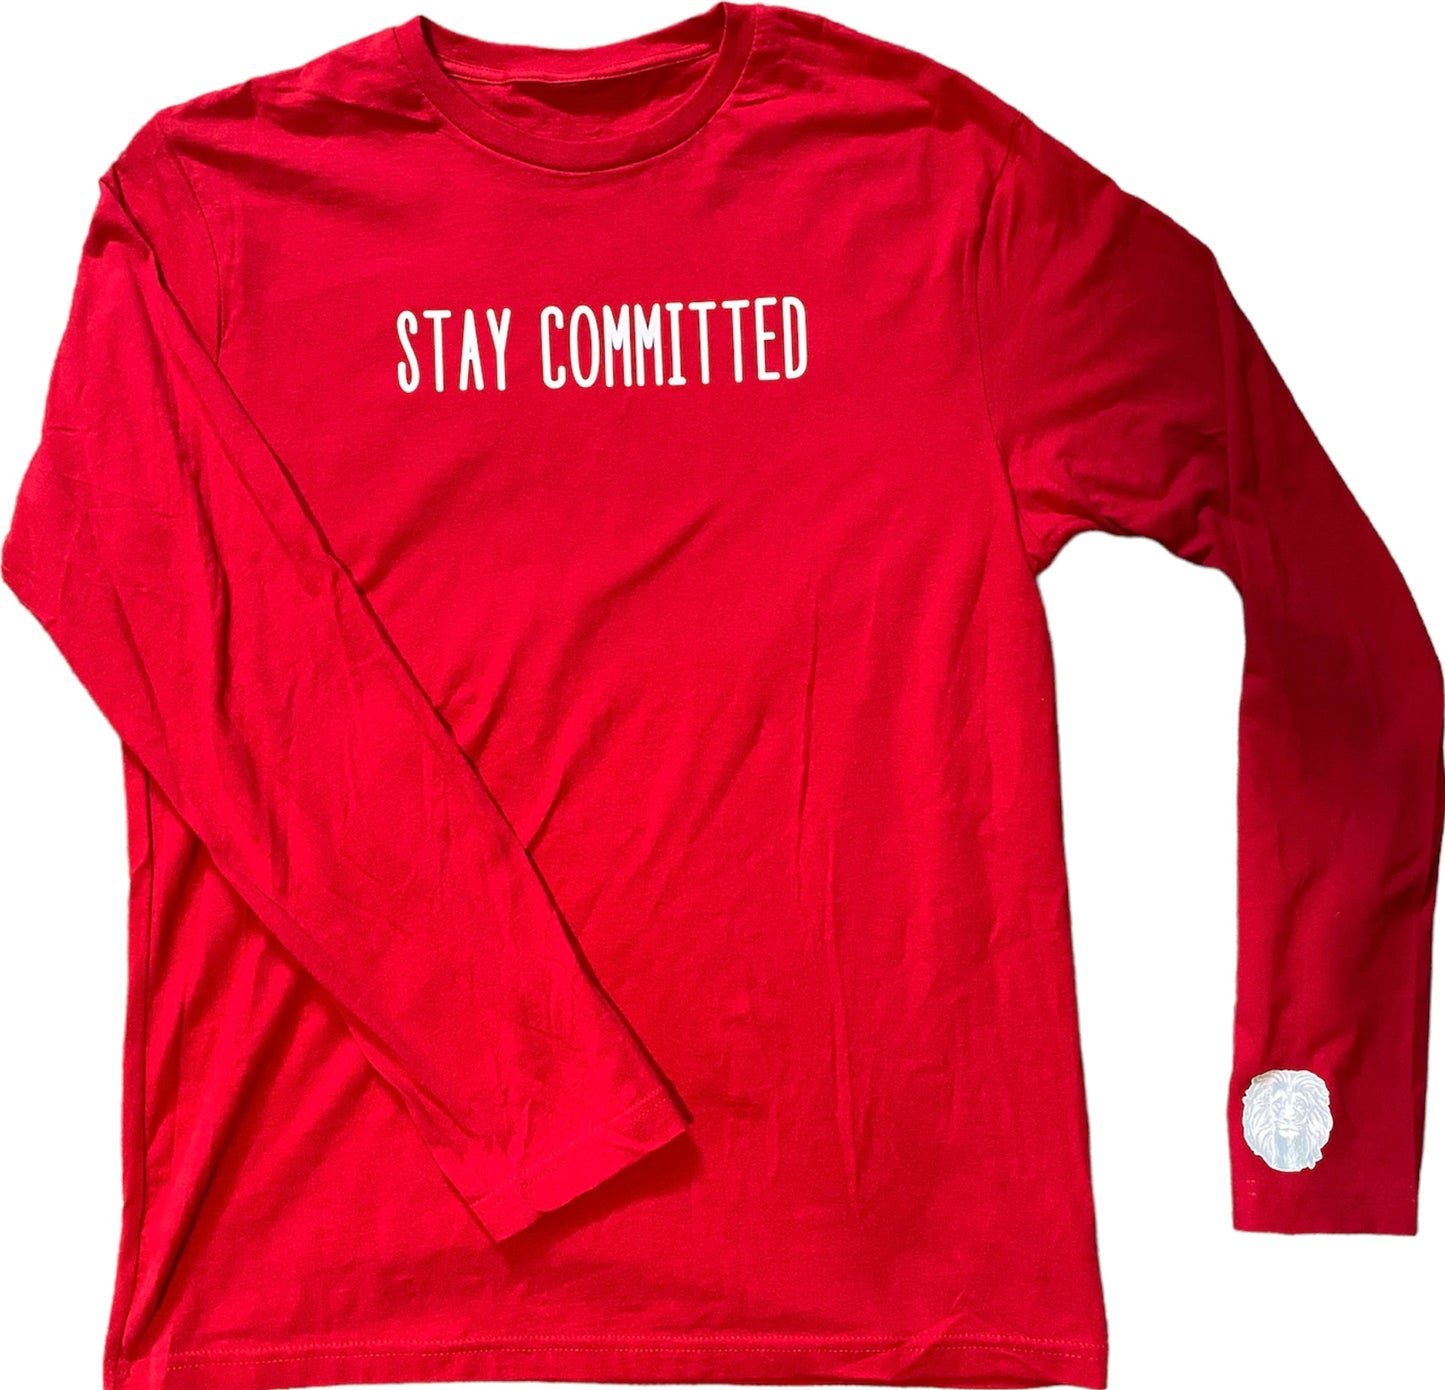 STAY COMMITTED Longsleeve